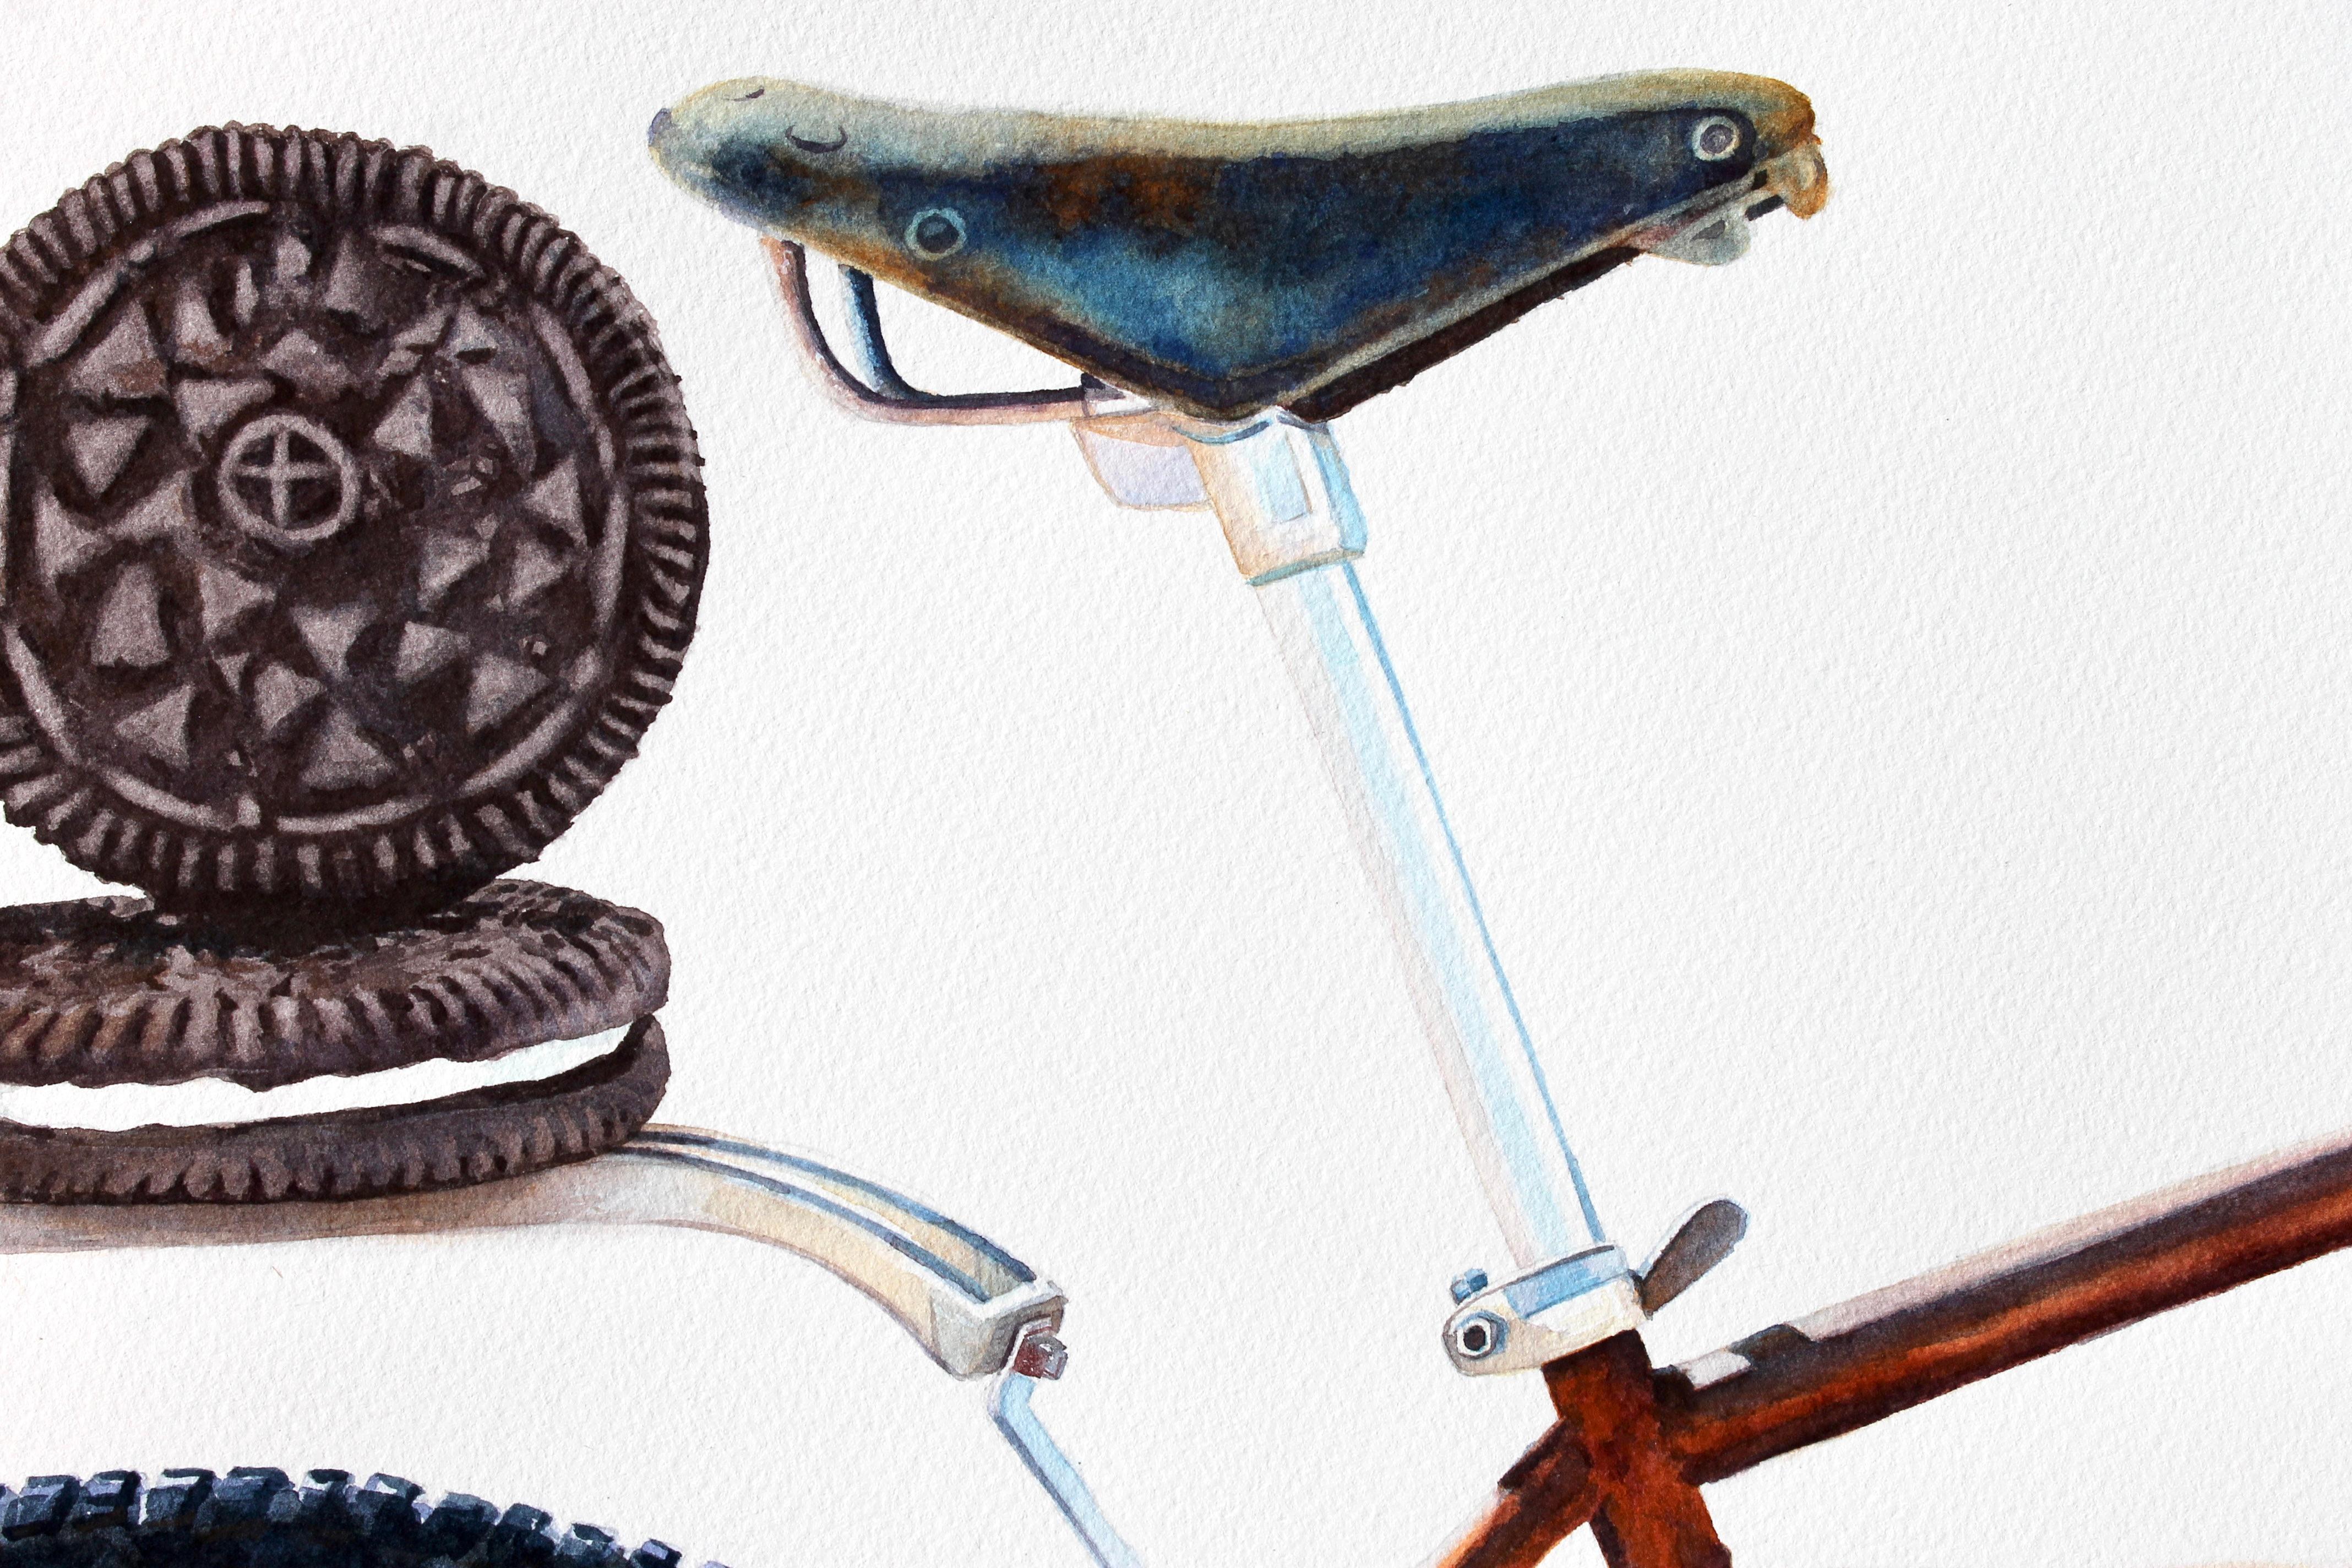 <p>Artist Comments<br>This vibrant still-life watercolor captures the essence of indulgence and a healthy lifestyle. Painted in the realist tradition, the piece showcases chocolate cookies with vanilla cream centers resting on a bike rack. The